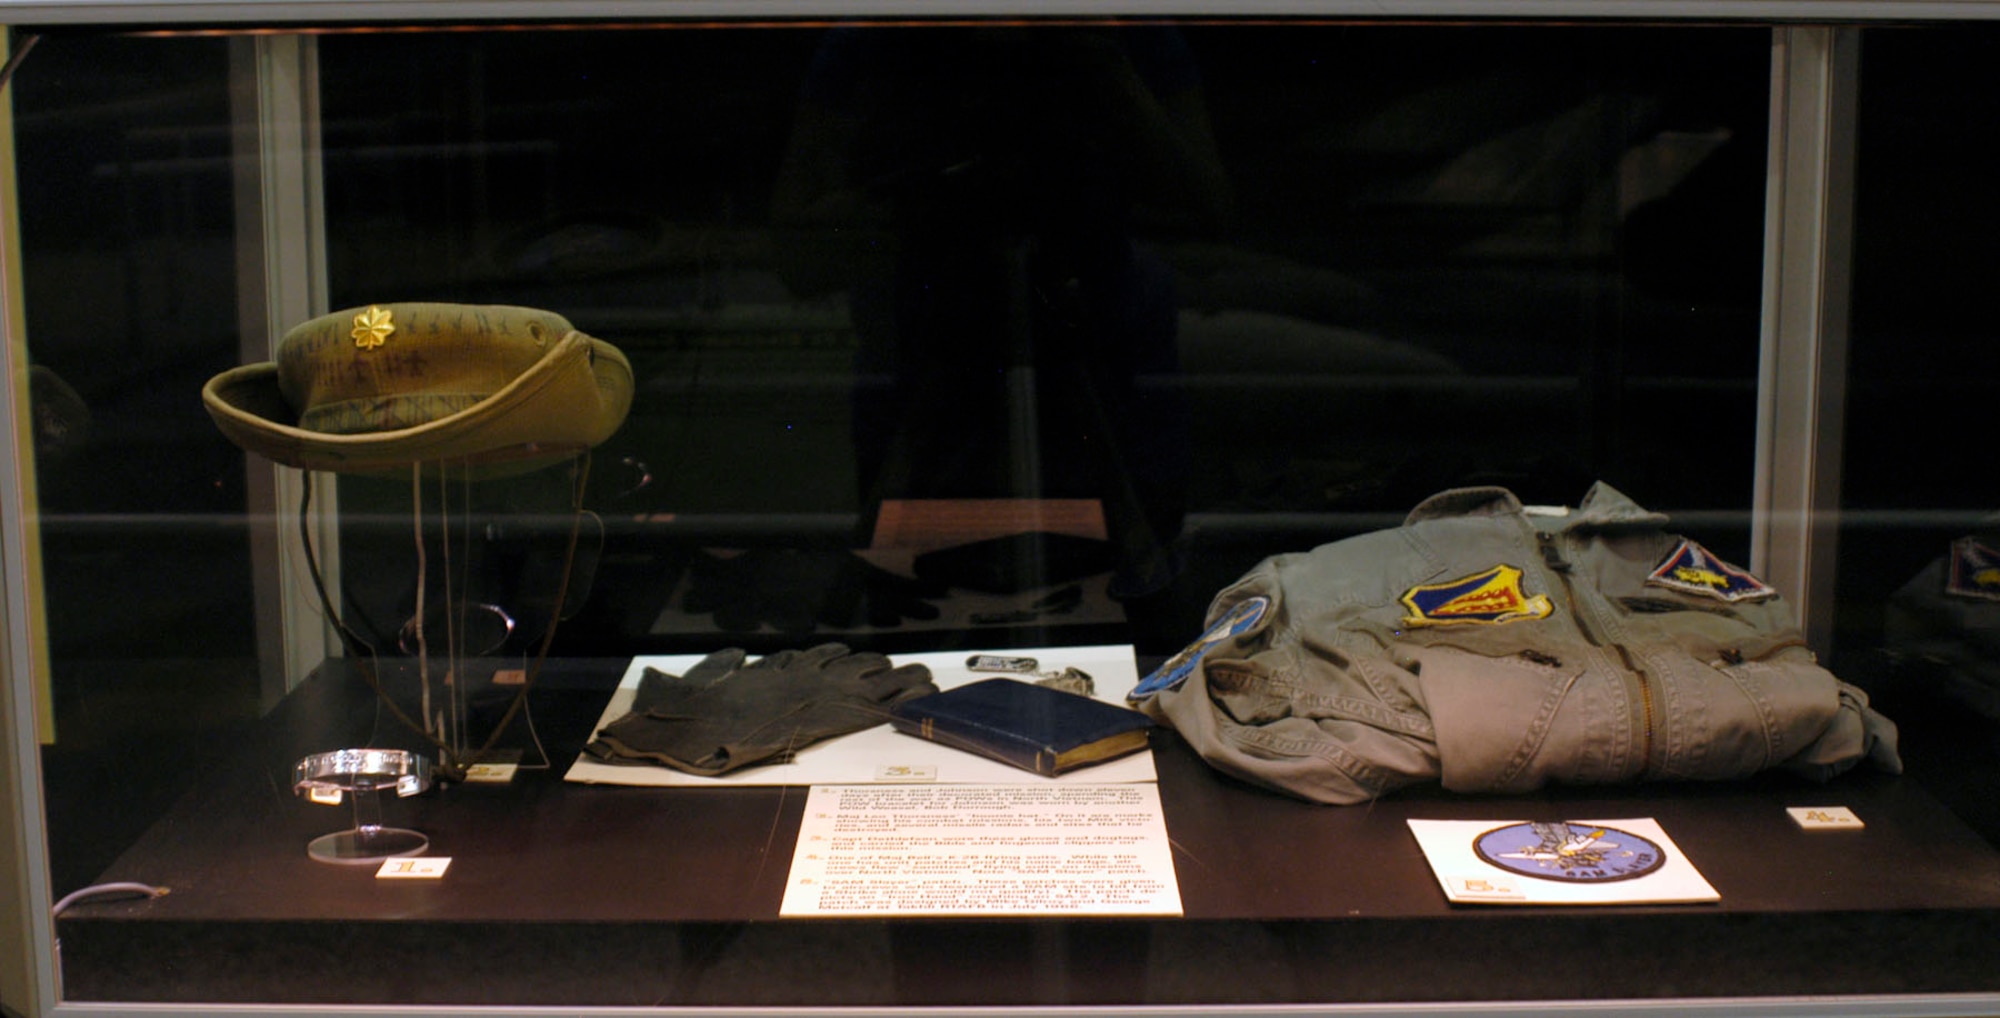 DAYTON, Ohio - Items on display in the First In, Last Out: Wild Weasels vs. SAMs exhibit: 1) Thorsness and Johnson were shot down eleven days after their decorated mission, spending the rest of the war as POWs in North Vietnam. This POW bracelet for Johnson was worn by another Wild Weasel, Bob Dorrough. 2) Maj. Leo Thorsness' "boonie hat." On it are marks showing his combat missions, his two MiG victories and several missile radars and sites that he destroyed. 3) Capt. Dethlefsen wore these gloves and dogtags and carried the Bible and fingernail clippers on this mission. 4) One of Maj. Bell's K-2B flying suits. While this one has unit patches and his name badge, aircrews flew "sanitized" flying suits on missions over North Vietnam. Note "SAM Slayer" patch. 5) "SAM Slayer" patch donated by Col. Mike Gilroy, USAF (ret.). These patches were given to aircrews who destroyed a SAM site (a hit from a Shrike alone would not qualify). The patch depicts an "Iron Hand" crushing an SA-2. The patch was designed by Mike Gilroy and George Metcalf at Takhli RTAFB in July 1966. (U.S. Air Force photo)